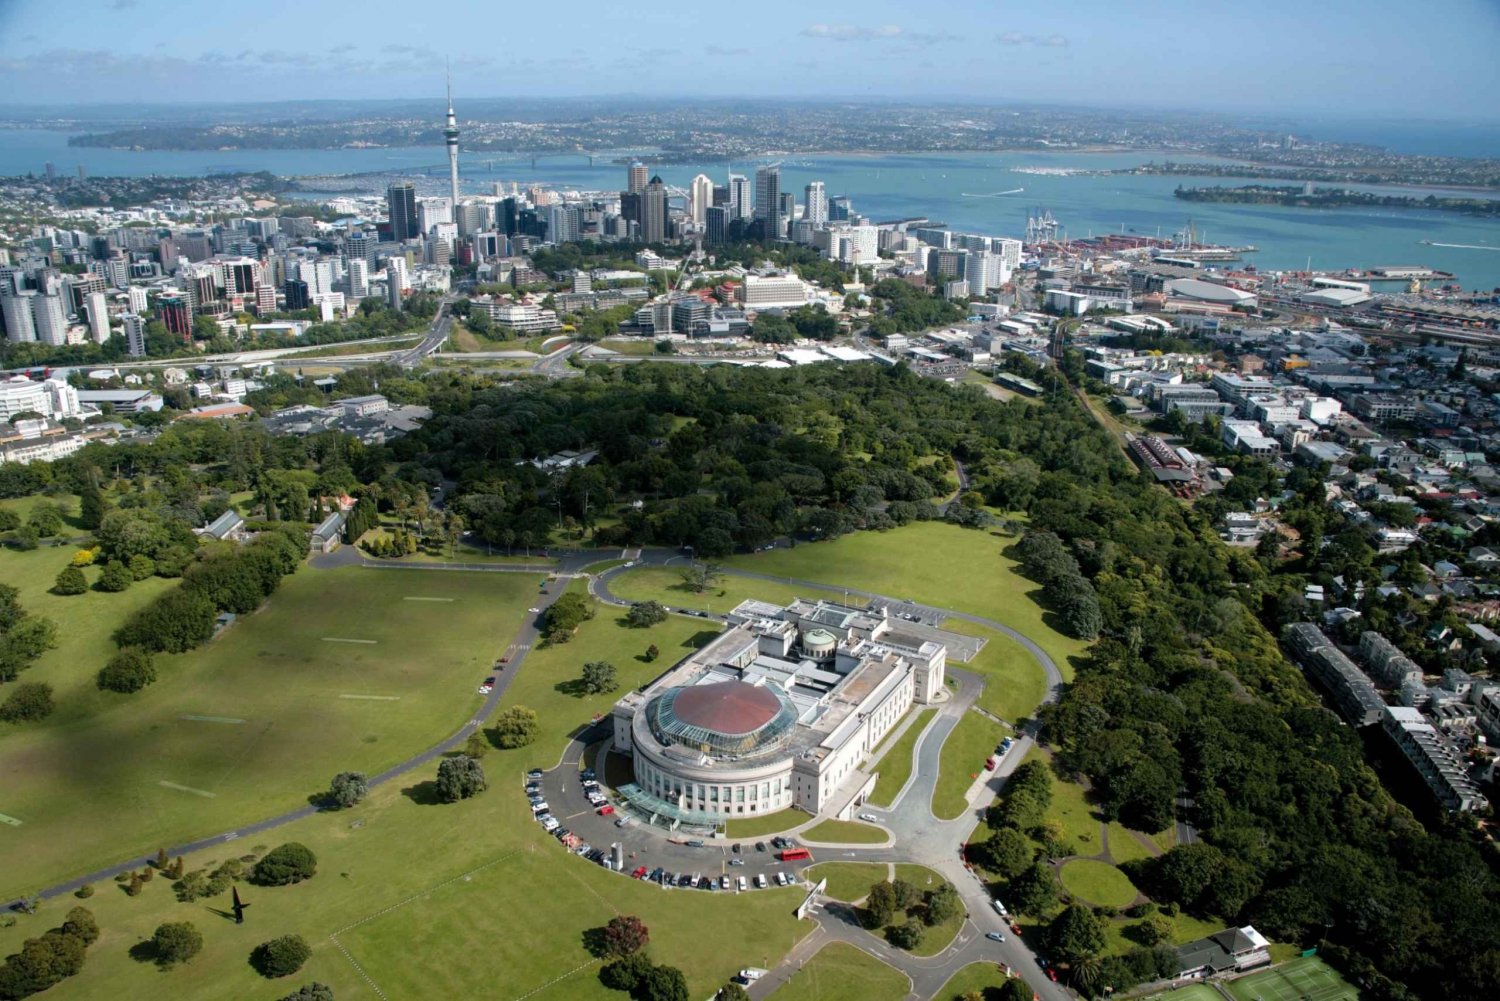 Auckland City Small Group Morning Discovery Tour